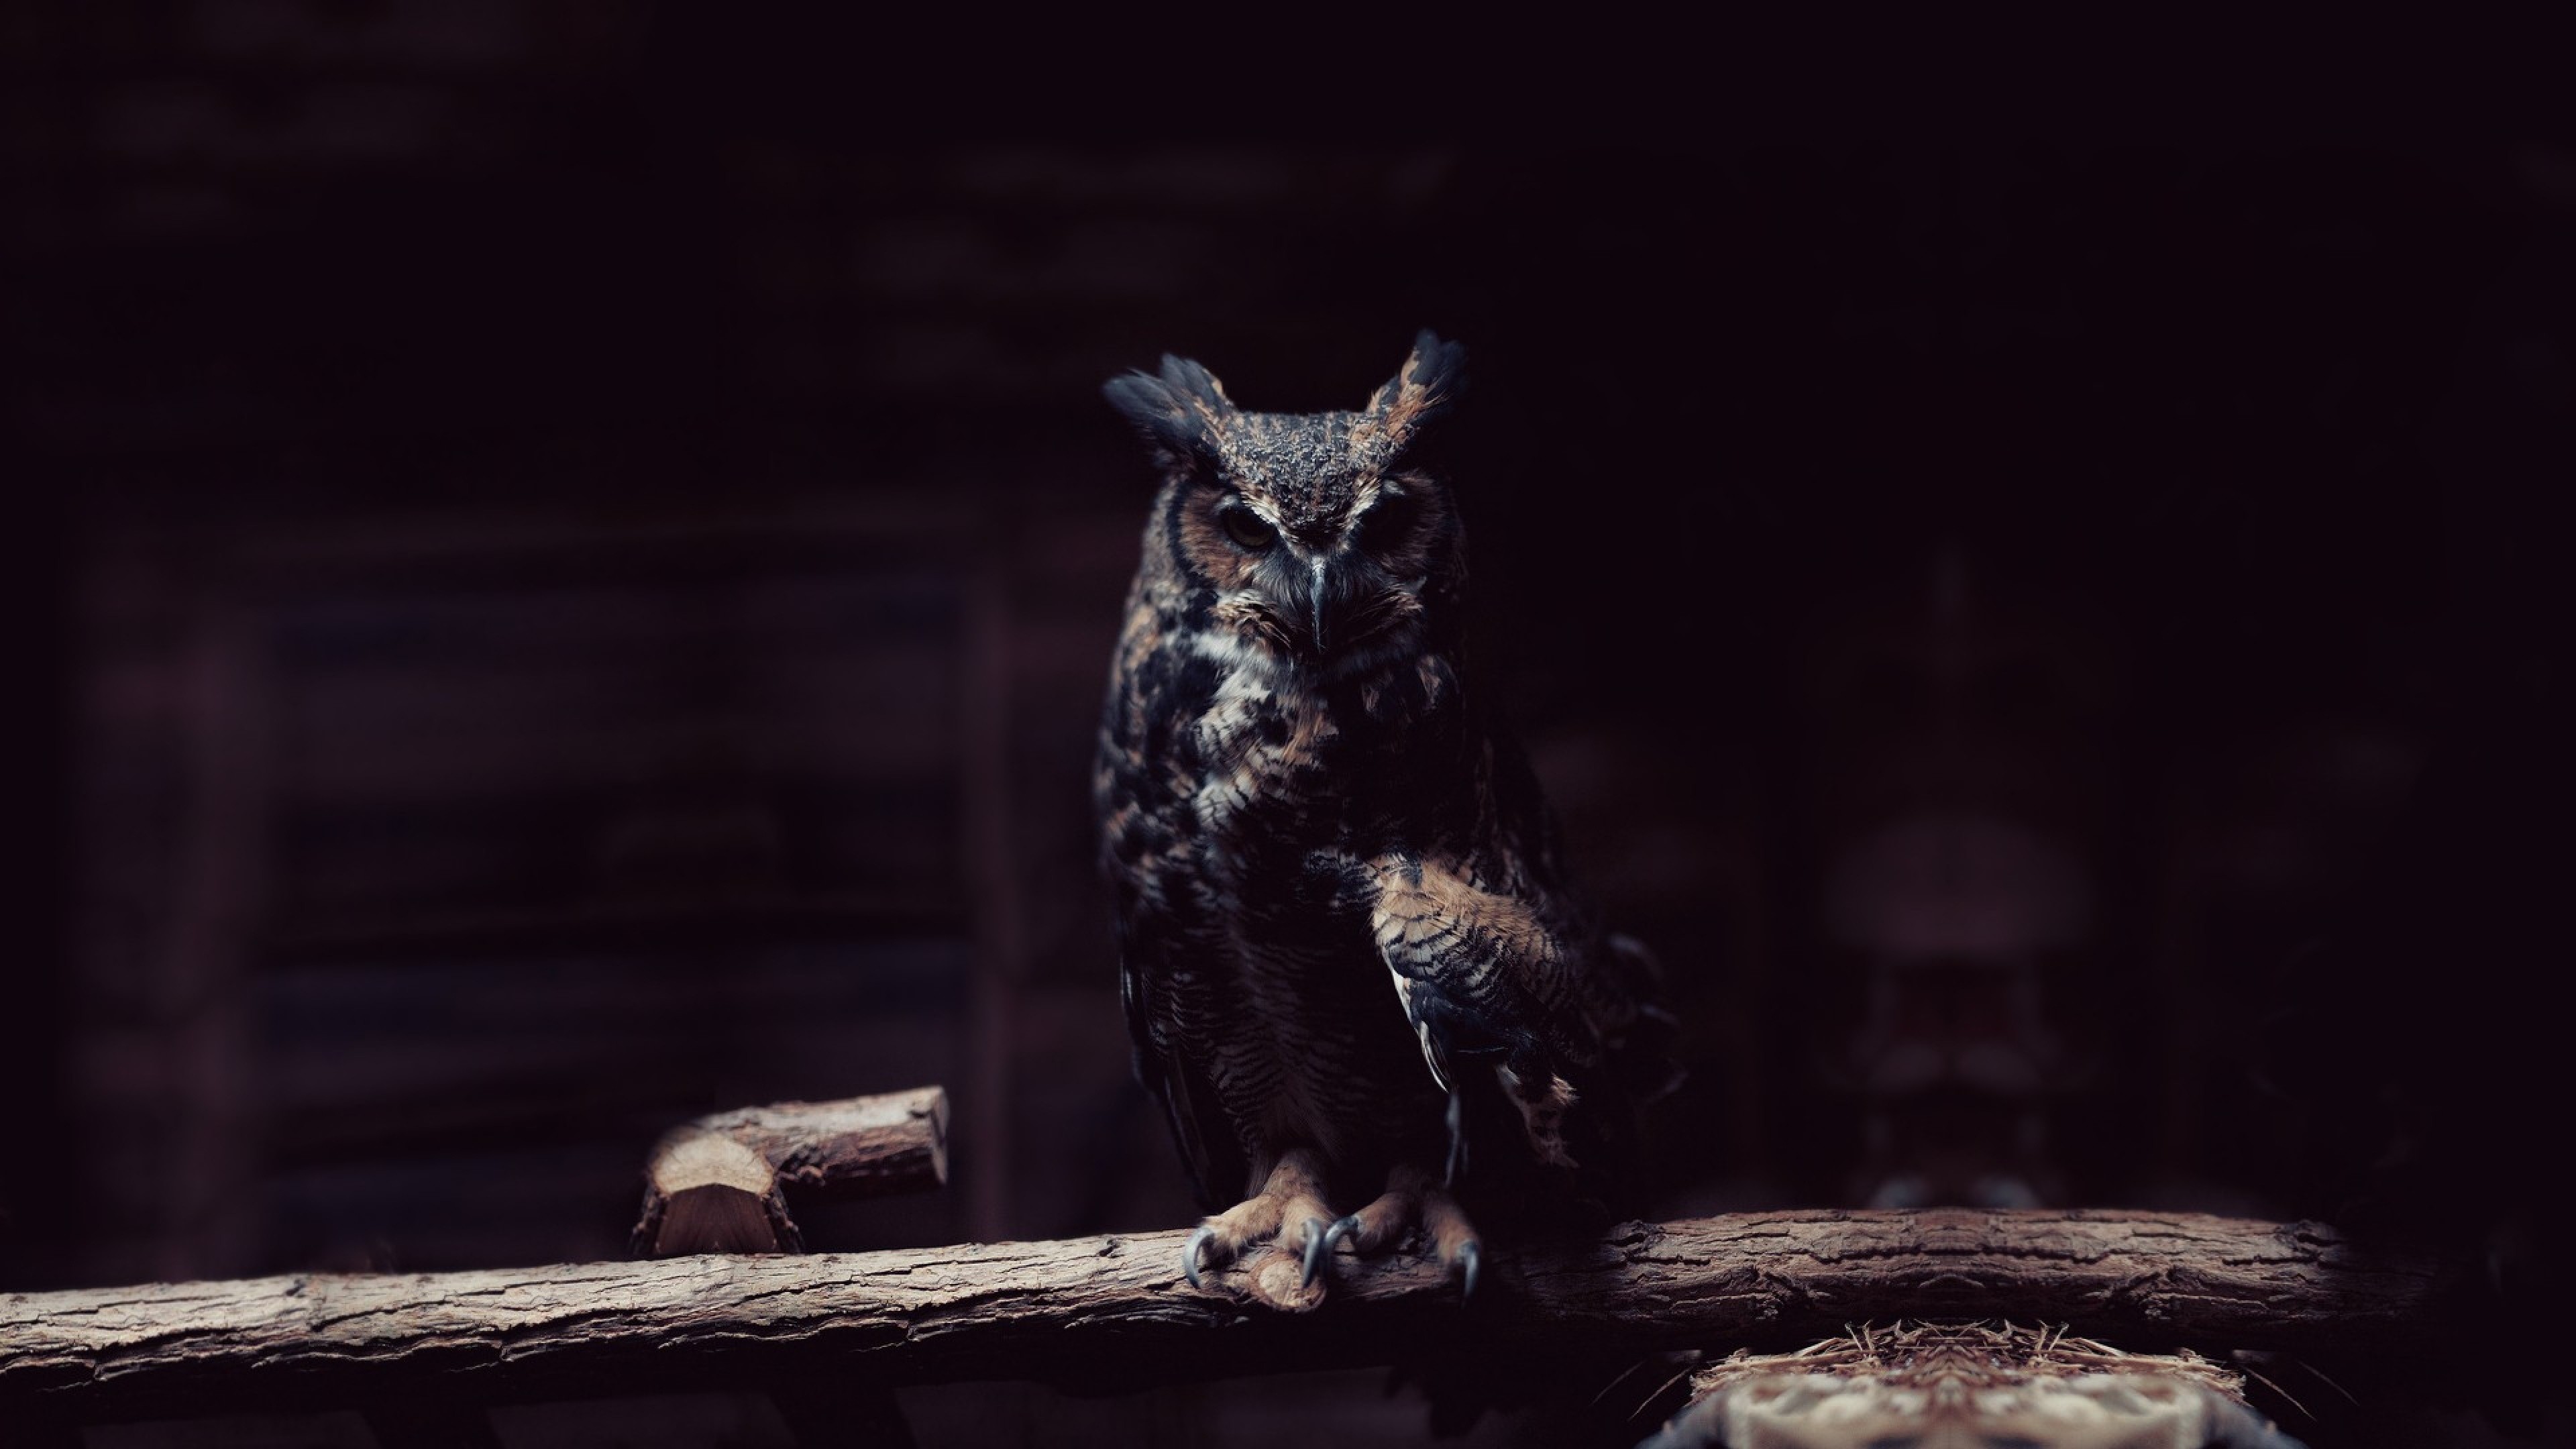 Mobile free owl wallpaper download wallpaper and background animals town cute owl wallpapers original resolution px